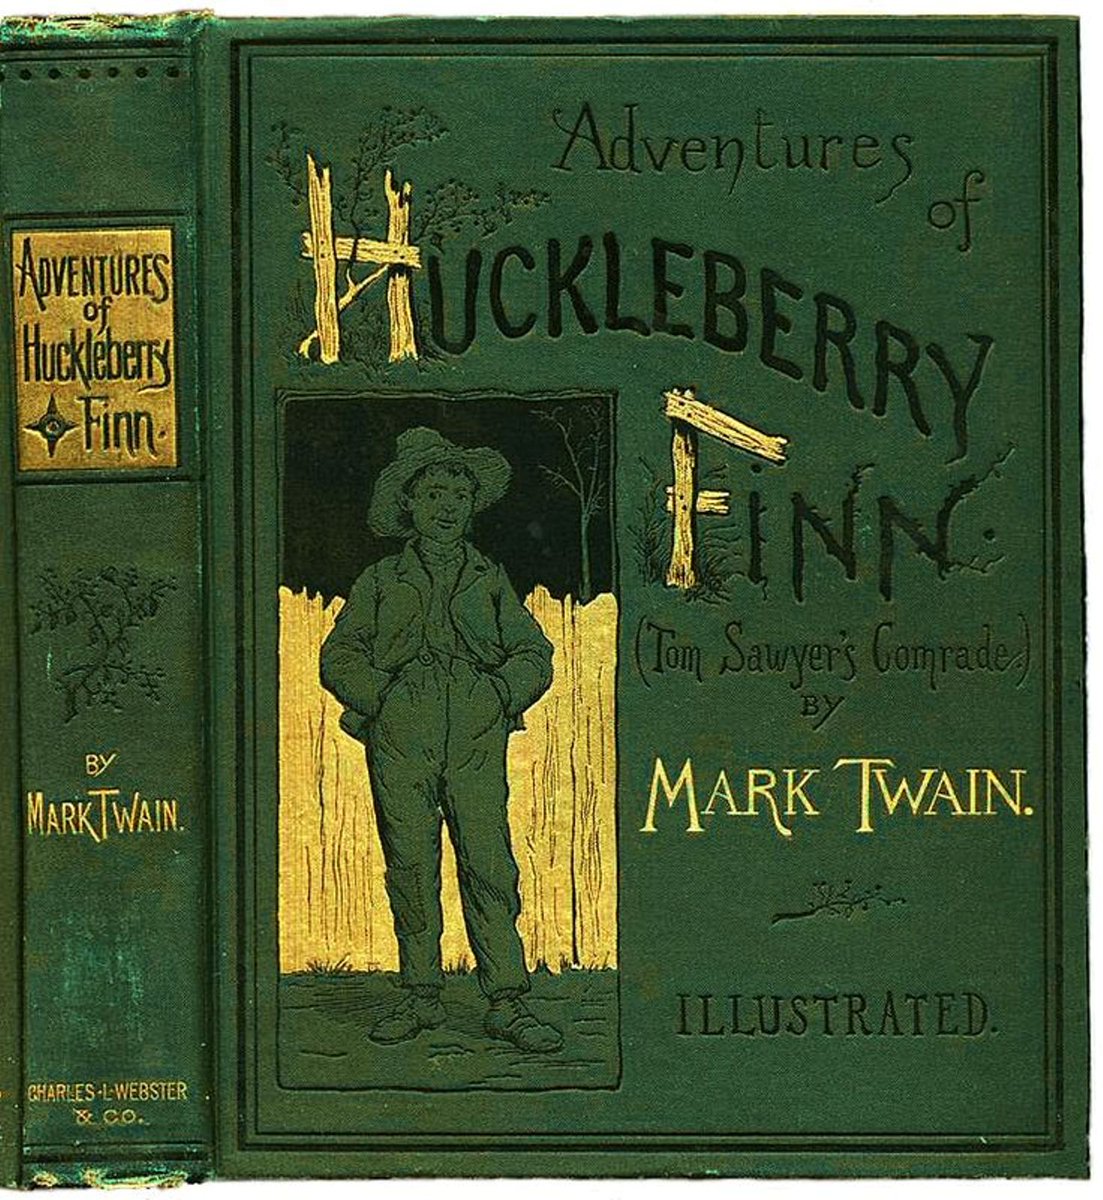 If you tell the truth, you don’t have to remember anything Mark Twain 30 XI 1835 — 21 IV 1910